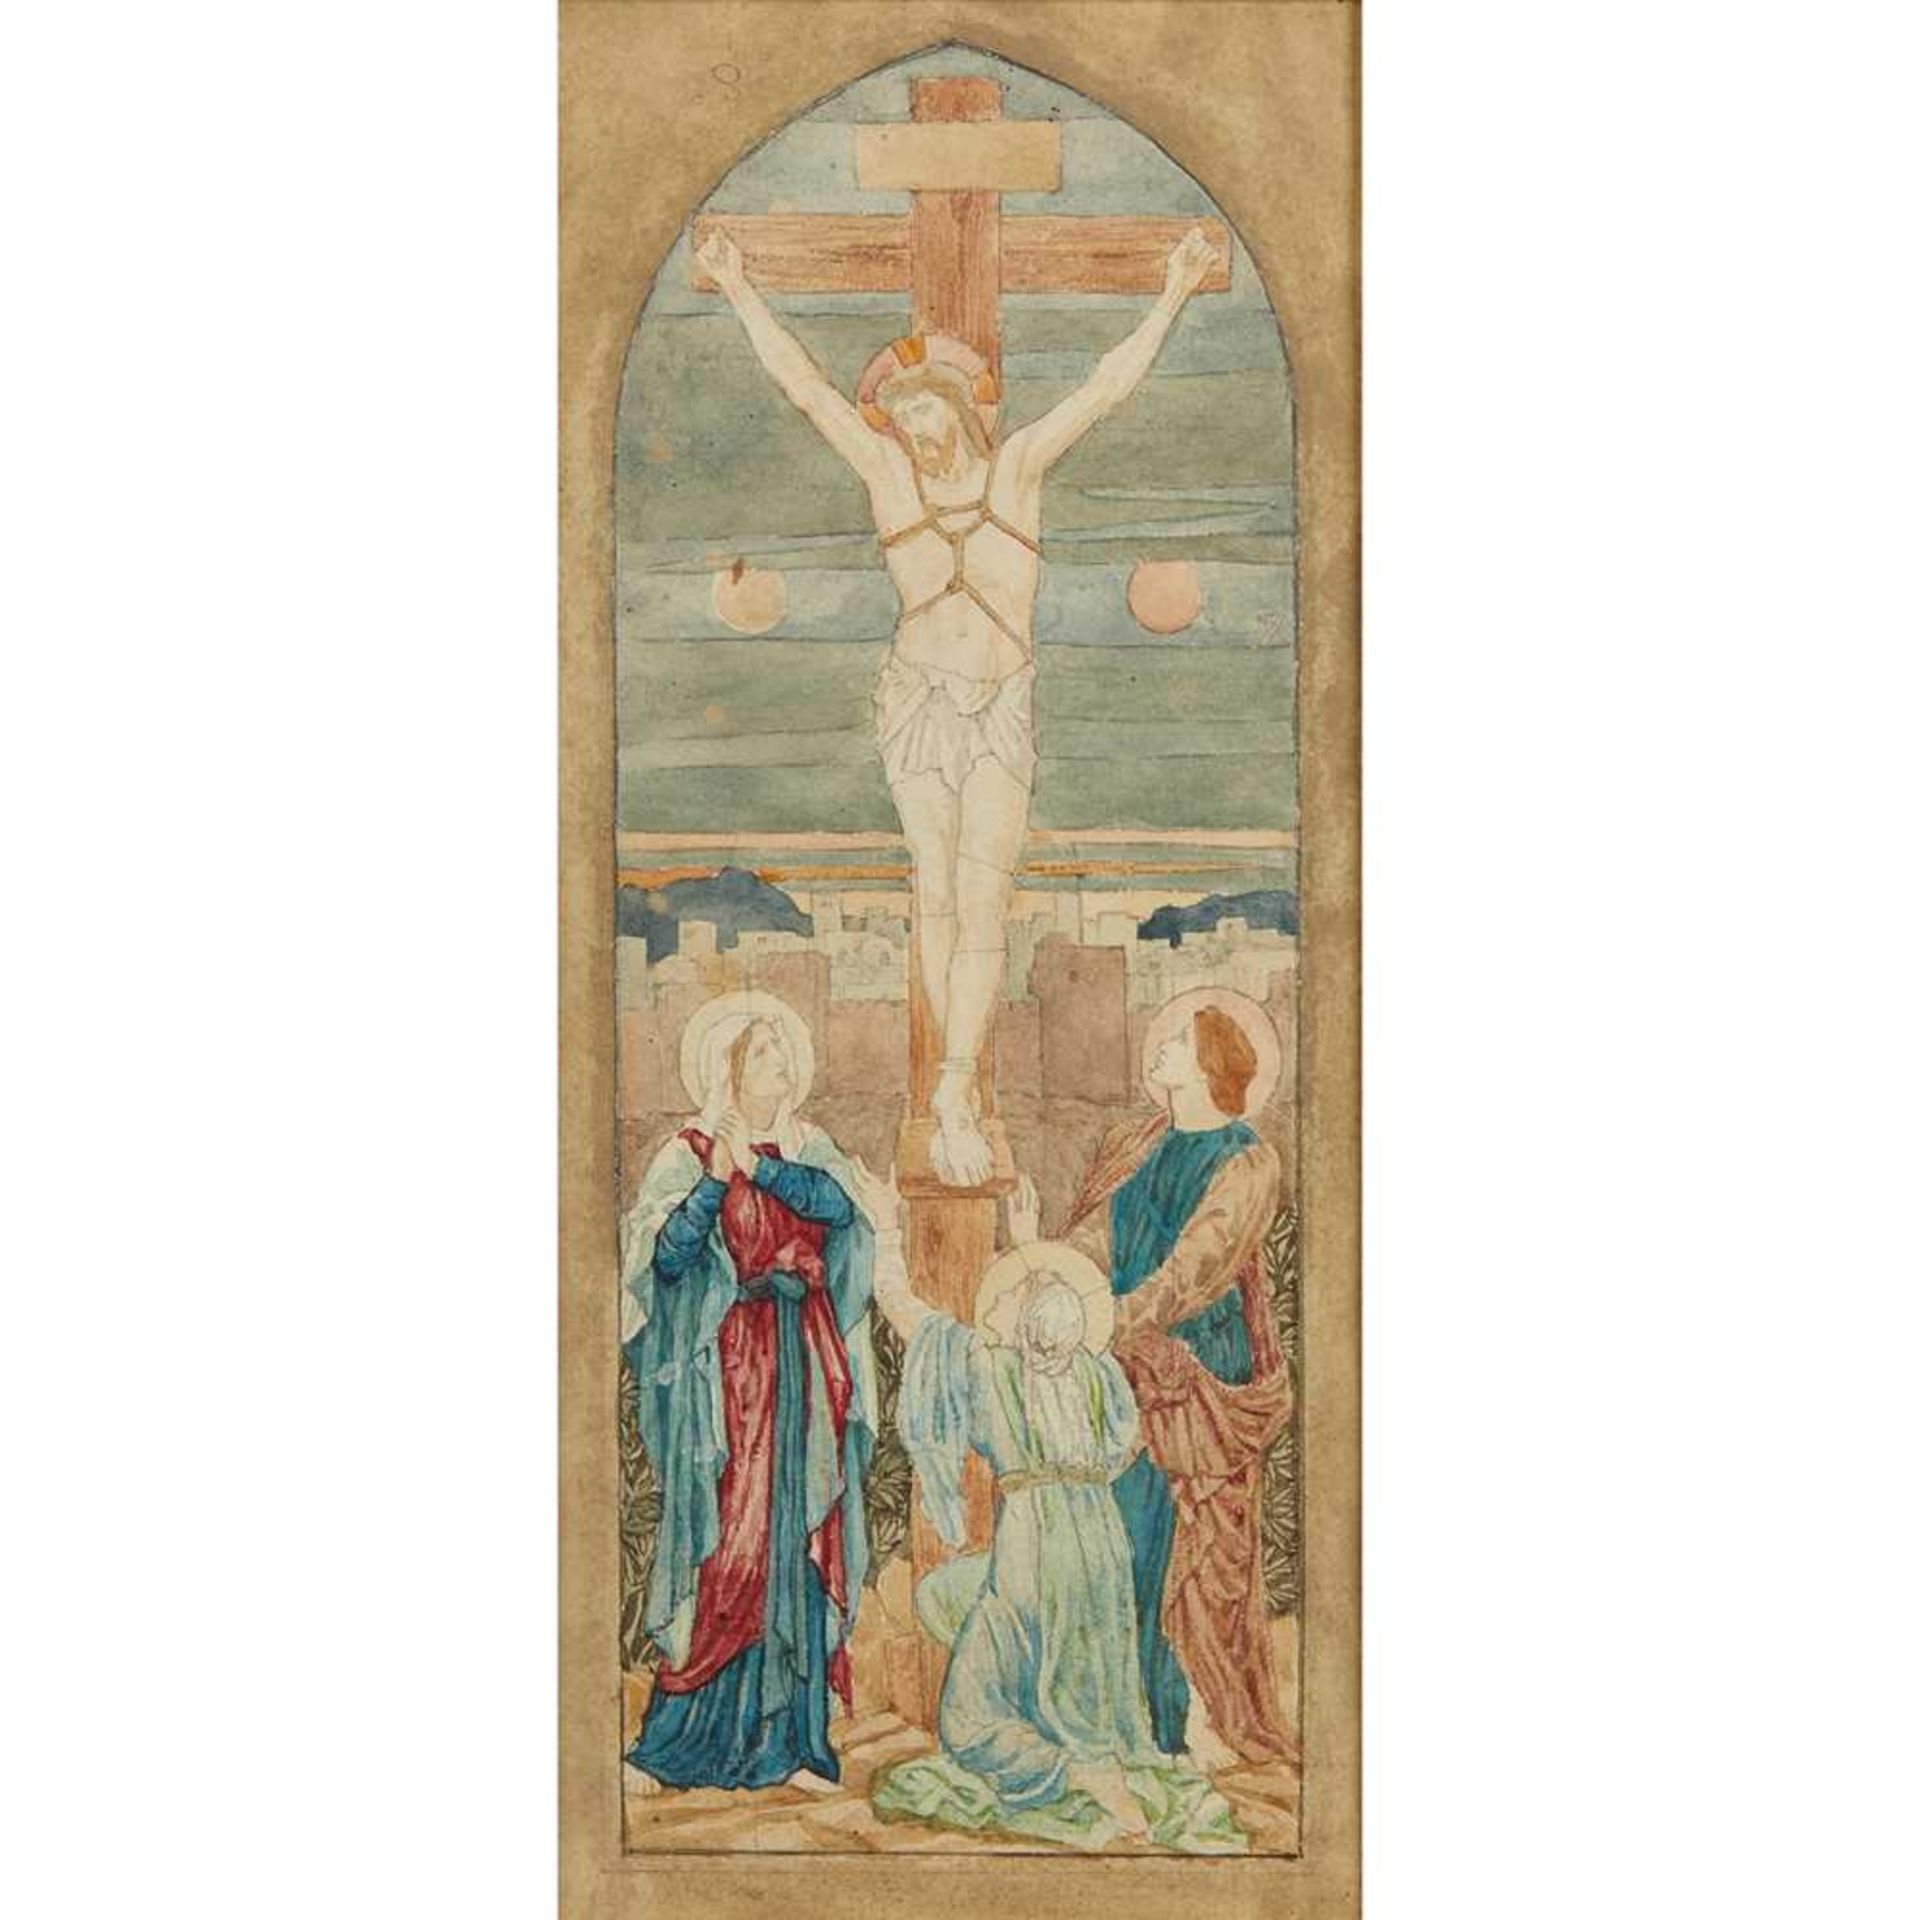 HENRY HOLIDAY (BRITISH 1839-1927) DESIGN FROM REREDOS IN ENAMELS FOR HOLY TRINITY, EDINBURGH - 1900